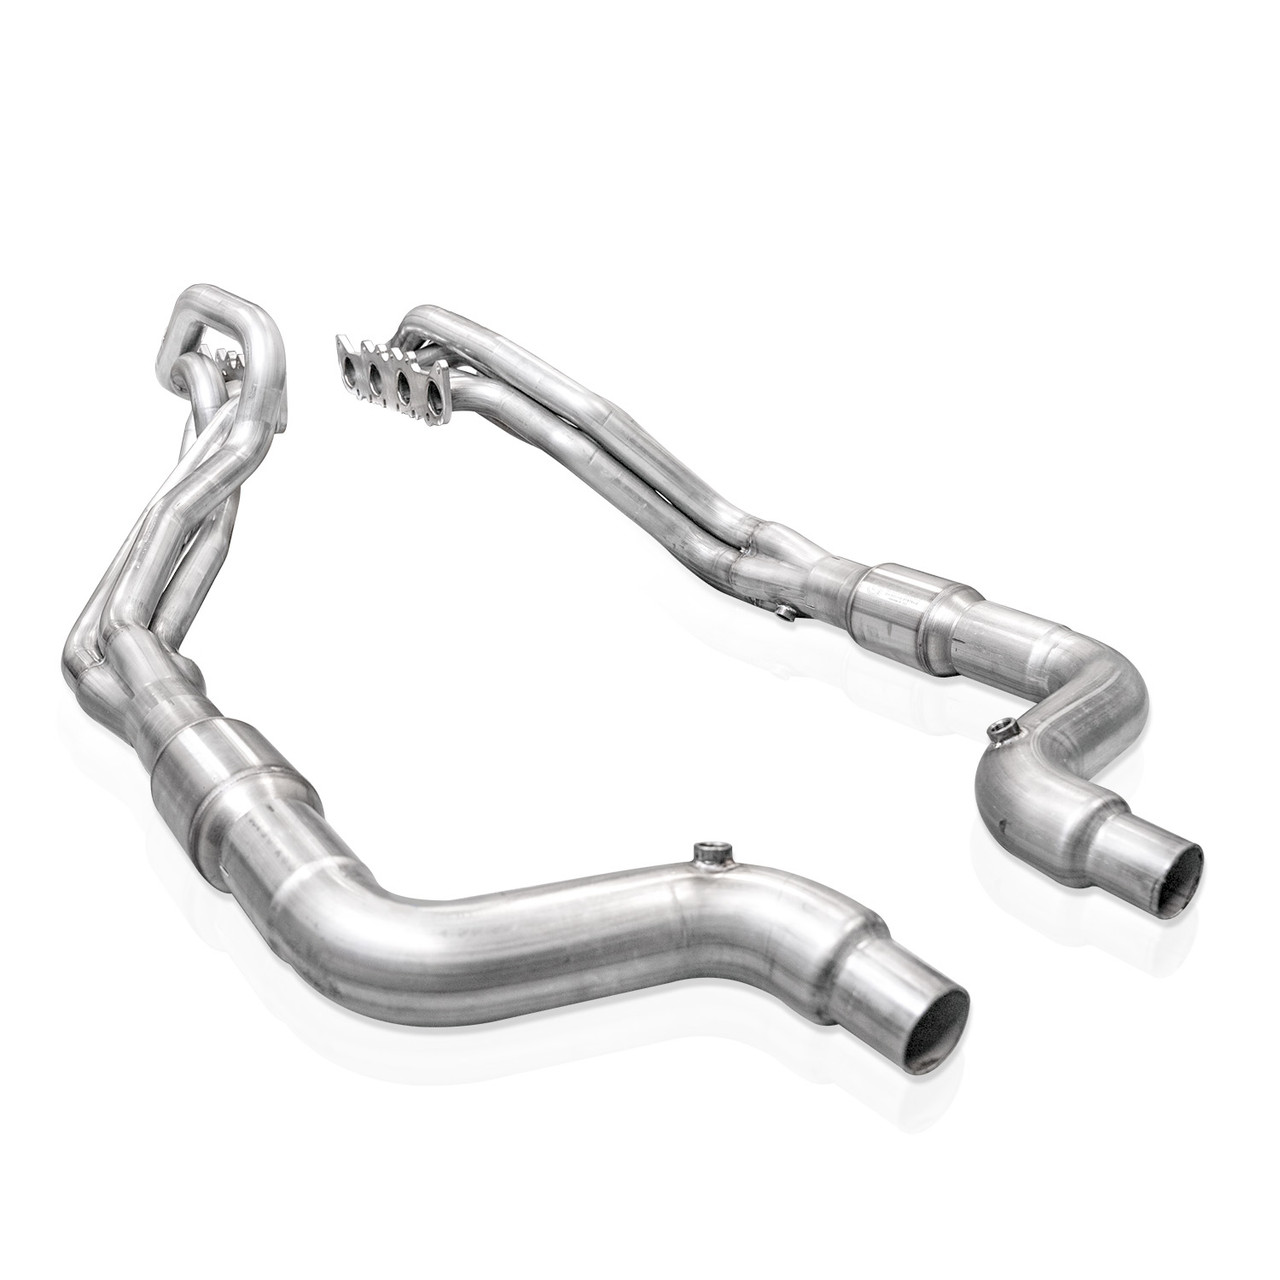 Stainless Works 1 7/8" Long Tube Headers w. High Flow Cats / Aftermarket Connect - S550 / S650 Mustang (M24H3CATLG)